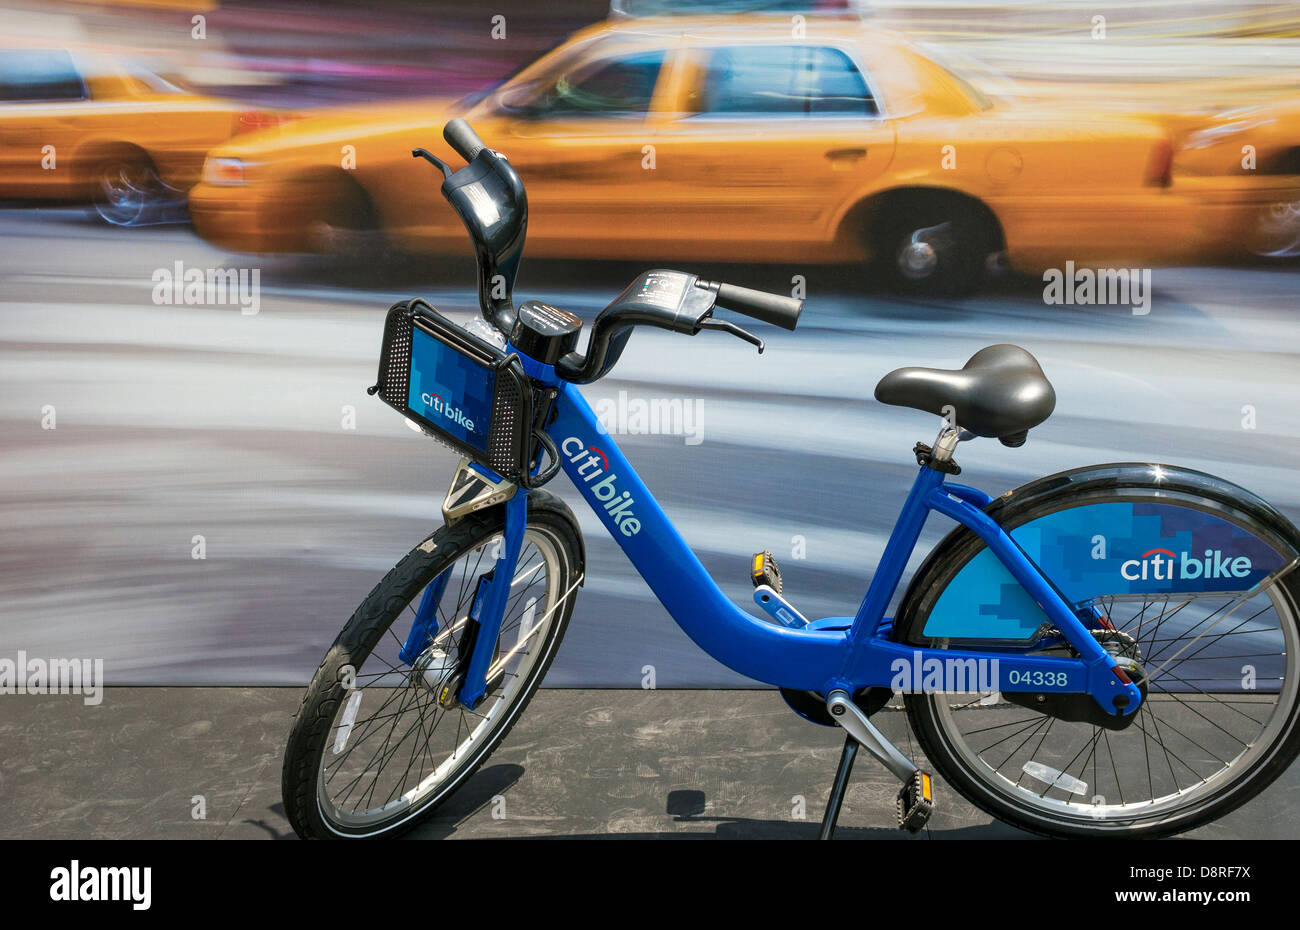 A NYC Citi Bike is contrasted against yellow taxis as local transportation Stock Photo